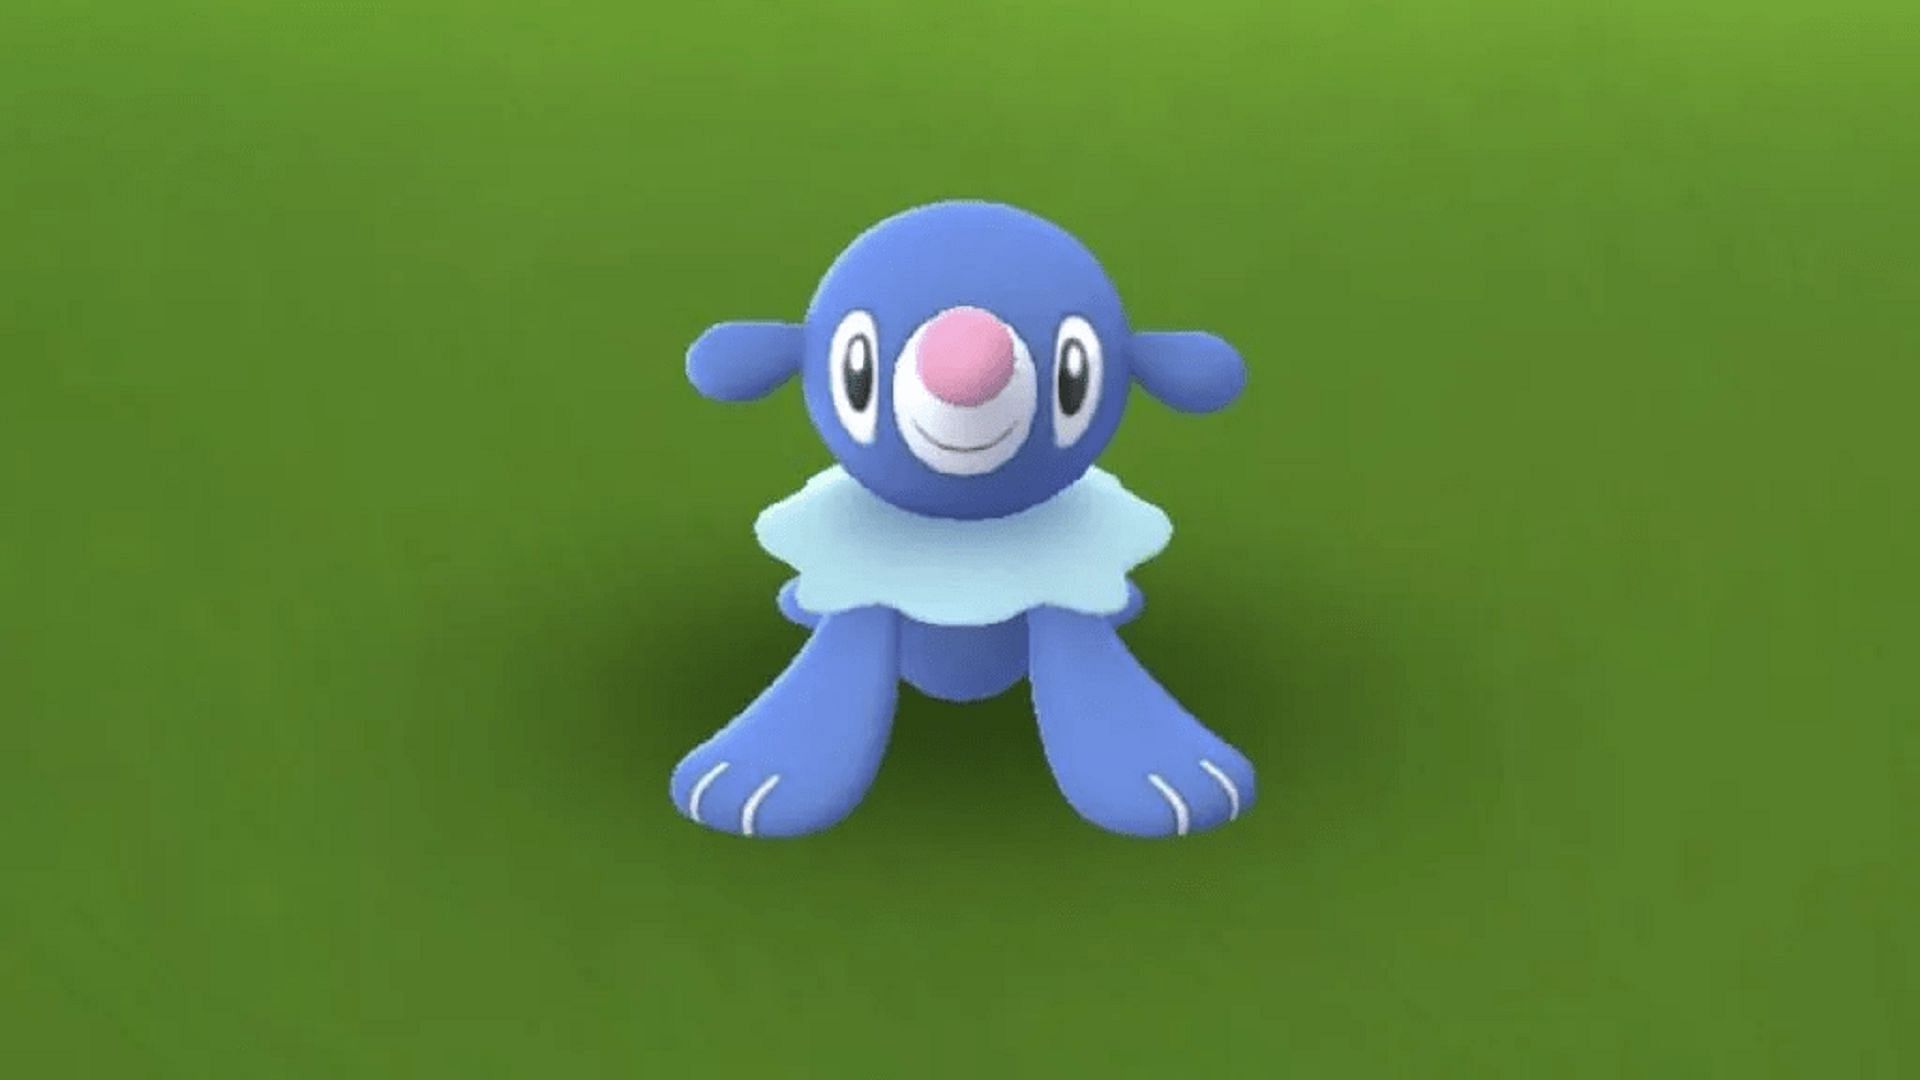 the-pokemonjesus: Popplio will cheer your worries... - Smiling Performer